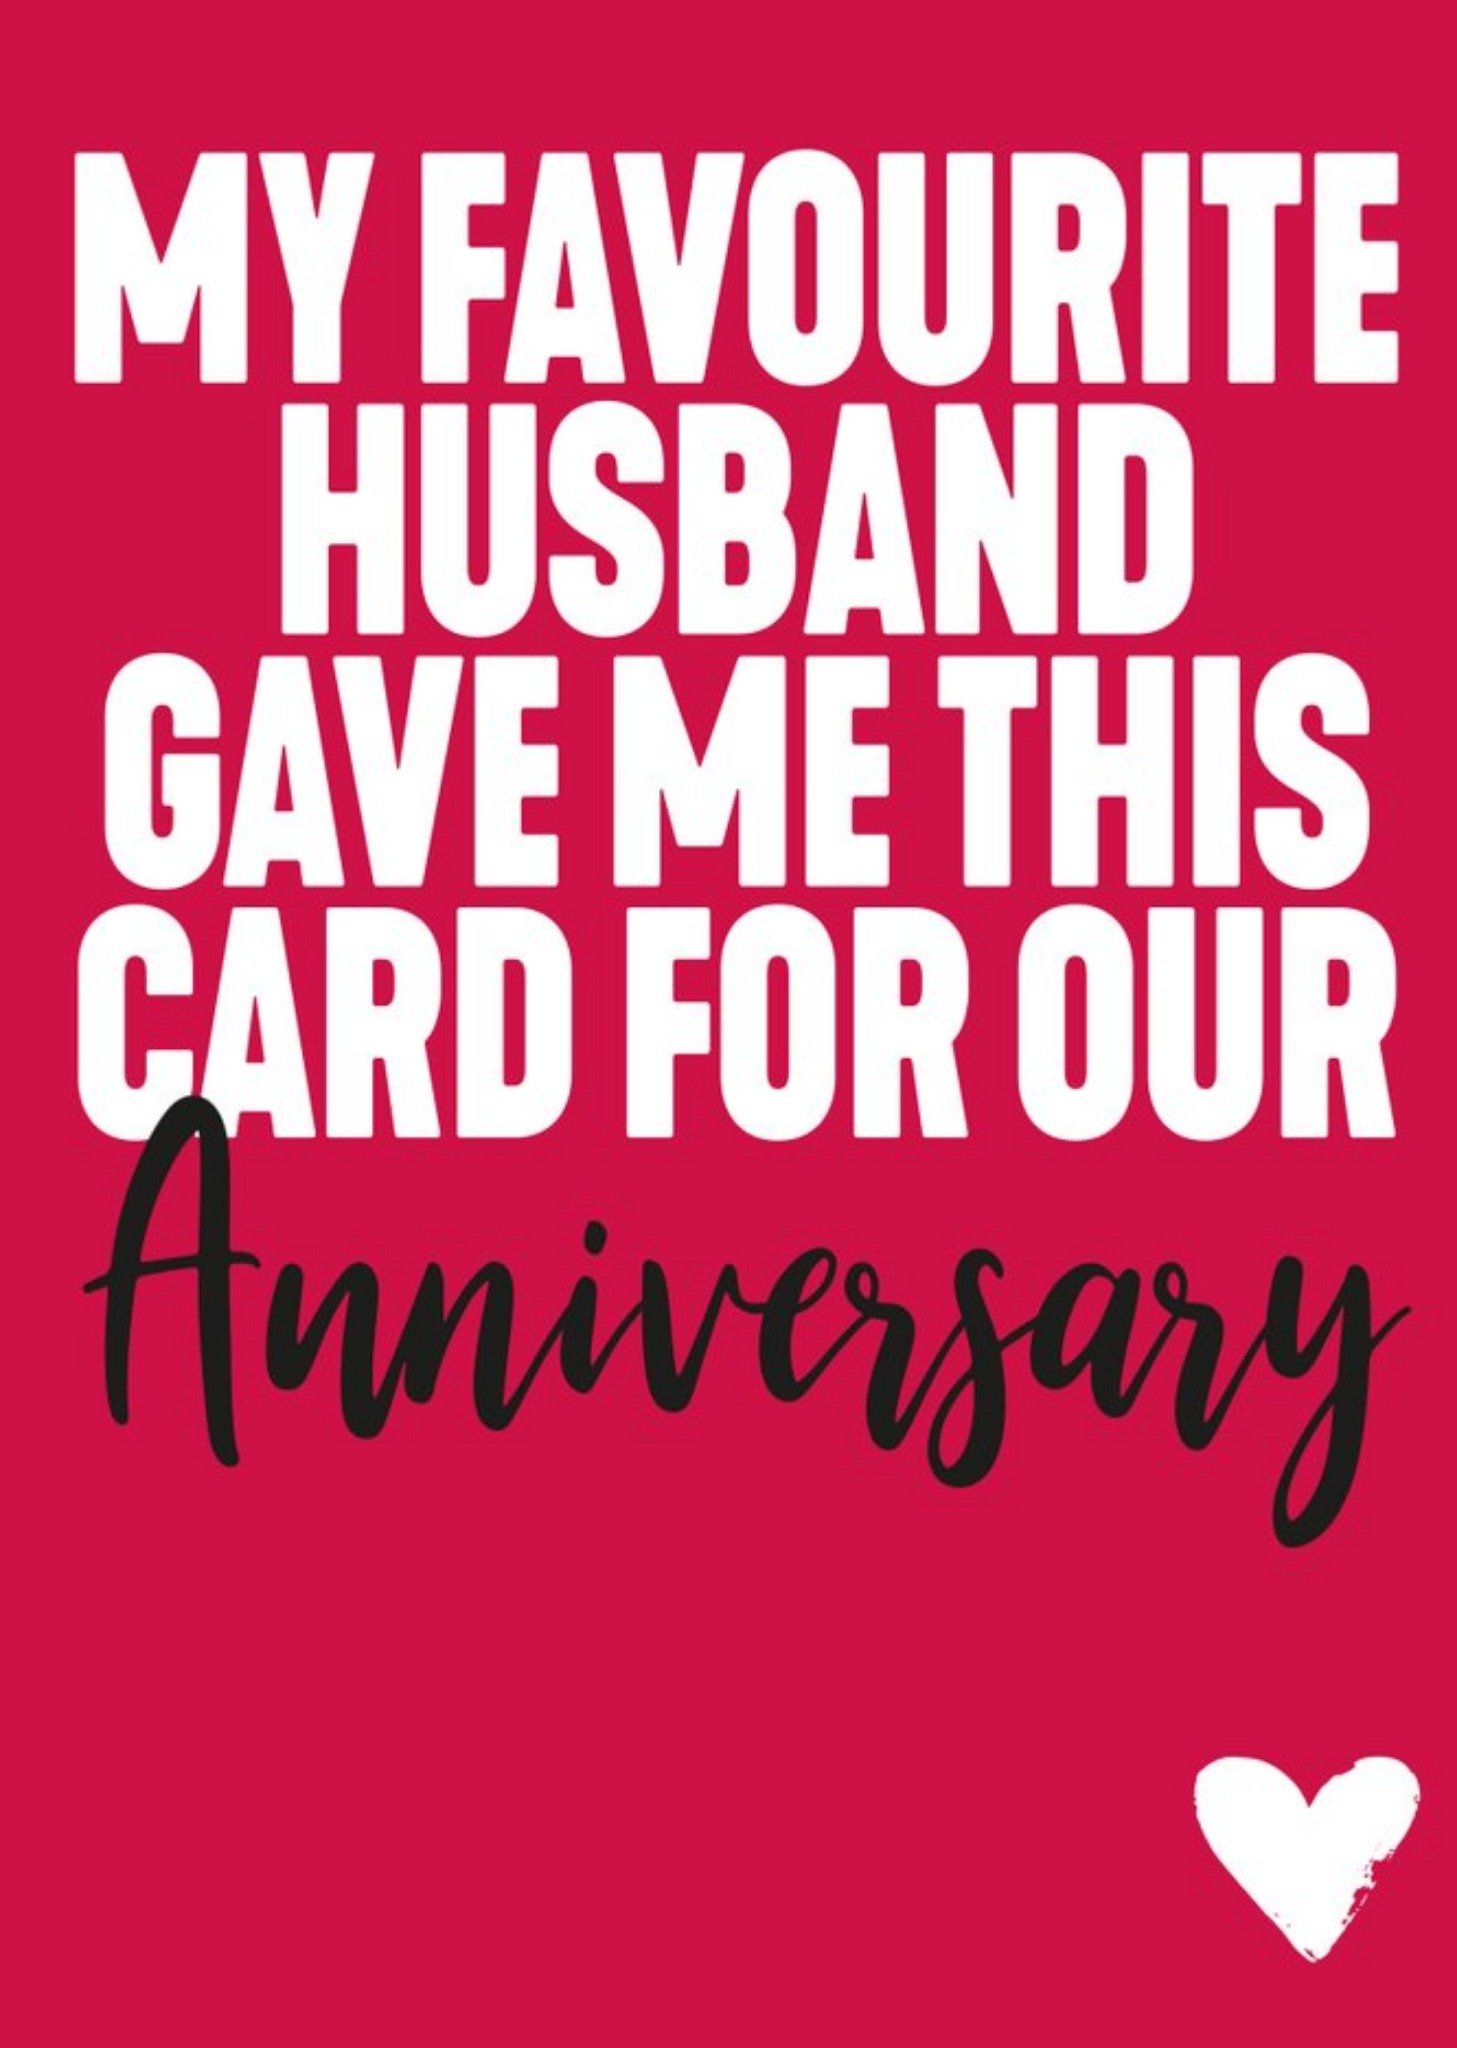 Filthy Sentiments Funny Typographic My Favourite Husband Gave Me This Card For Our Anniversary Ecard